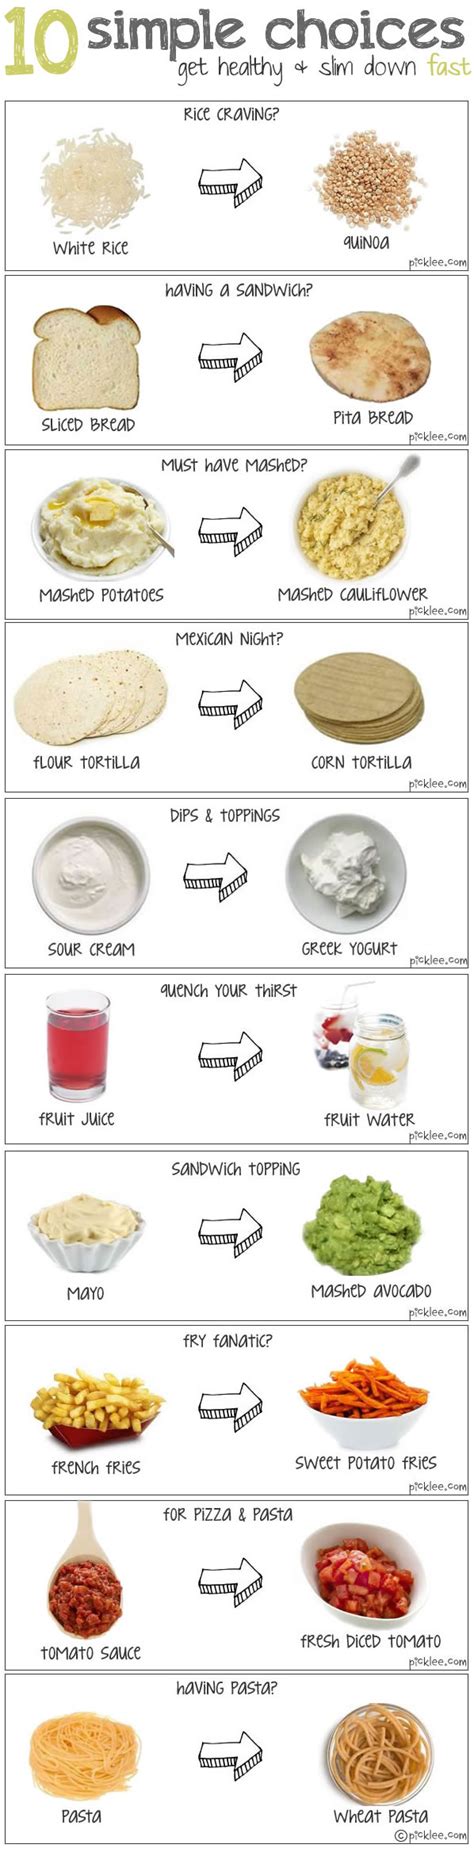 Healthy Baking Substitutions Infographic